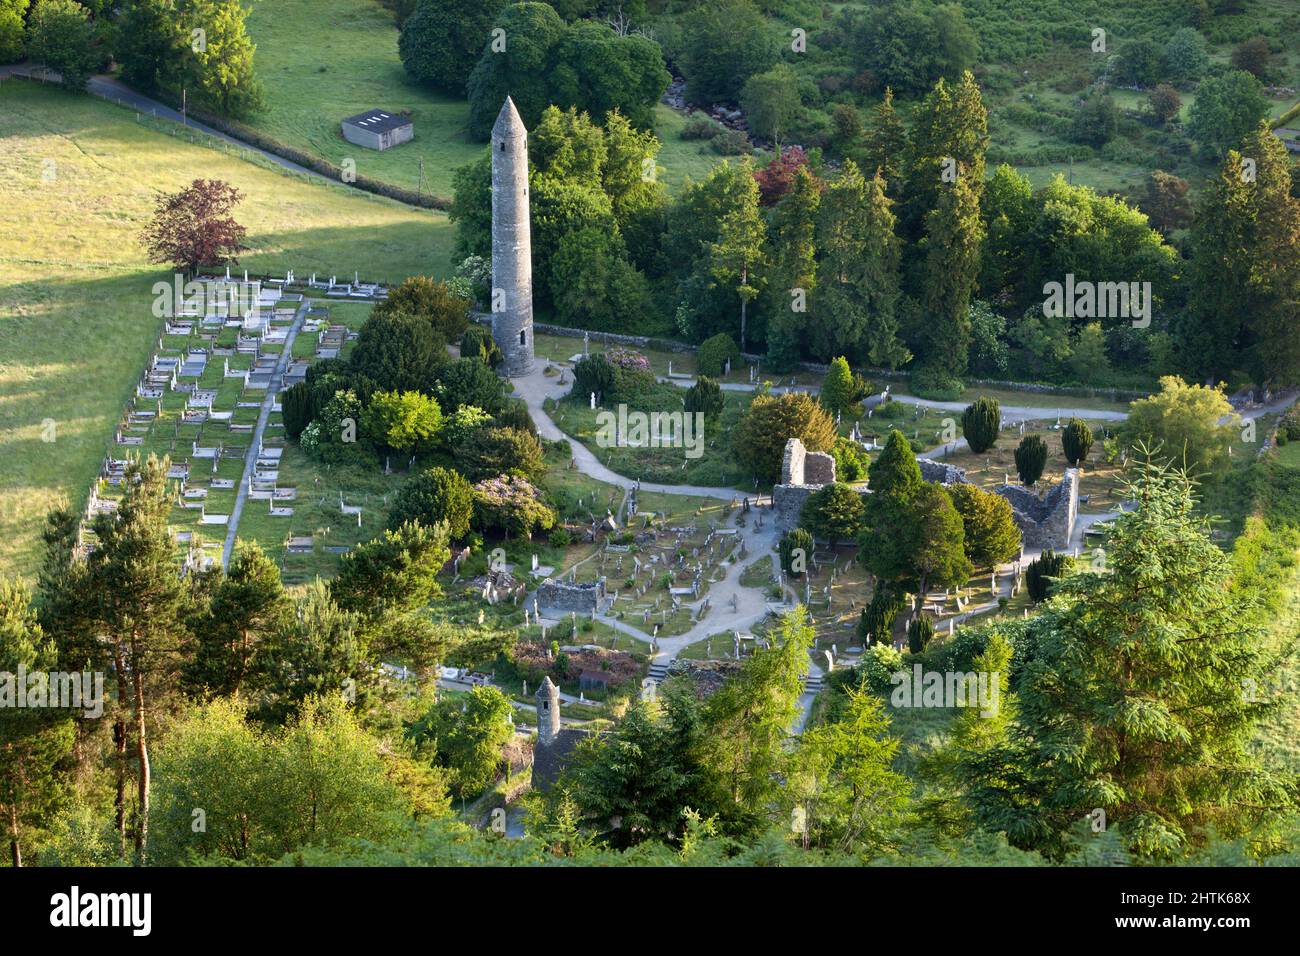 View over monastic site founded in 6th century by St Kevin, Glendalough, County Wicklow, Ireland Stock Photo